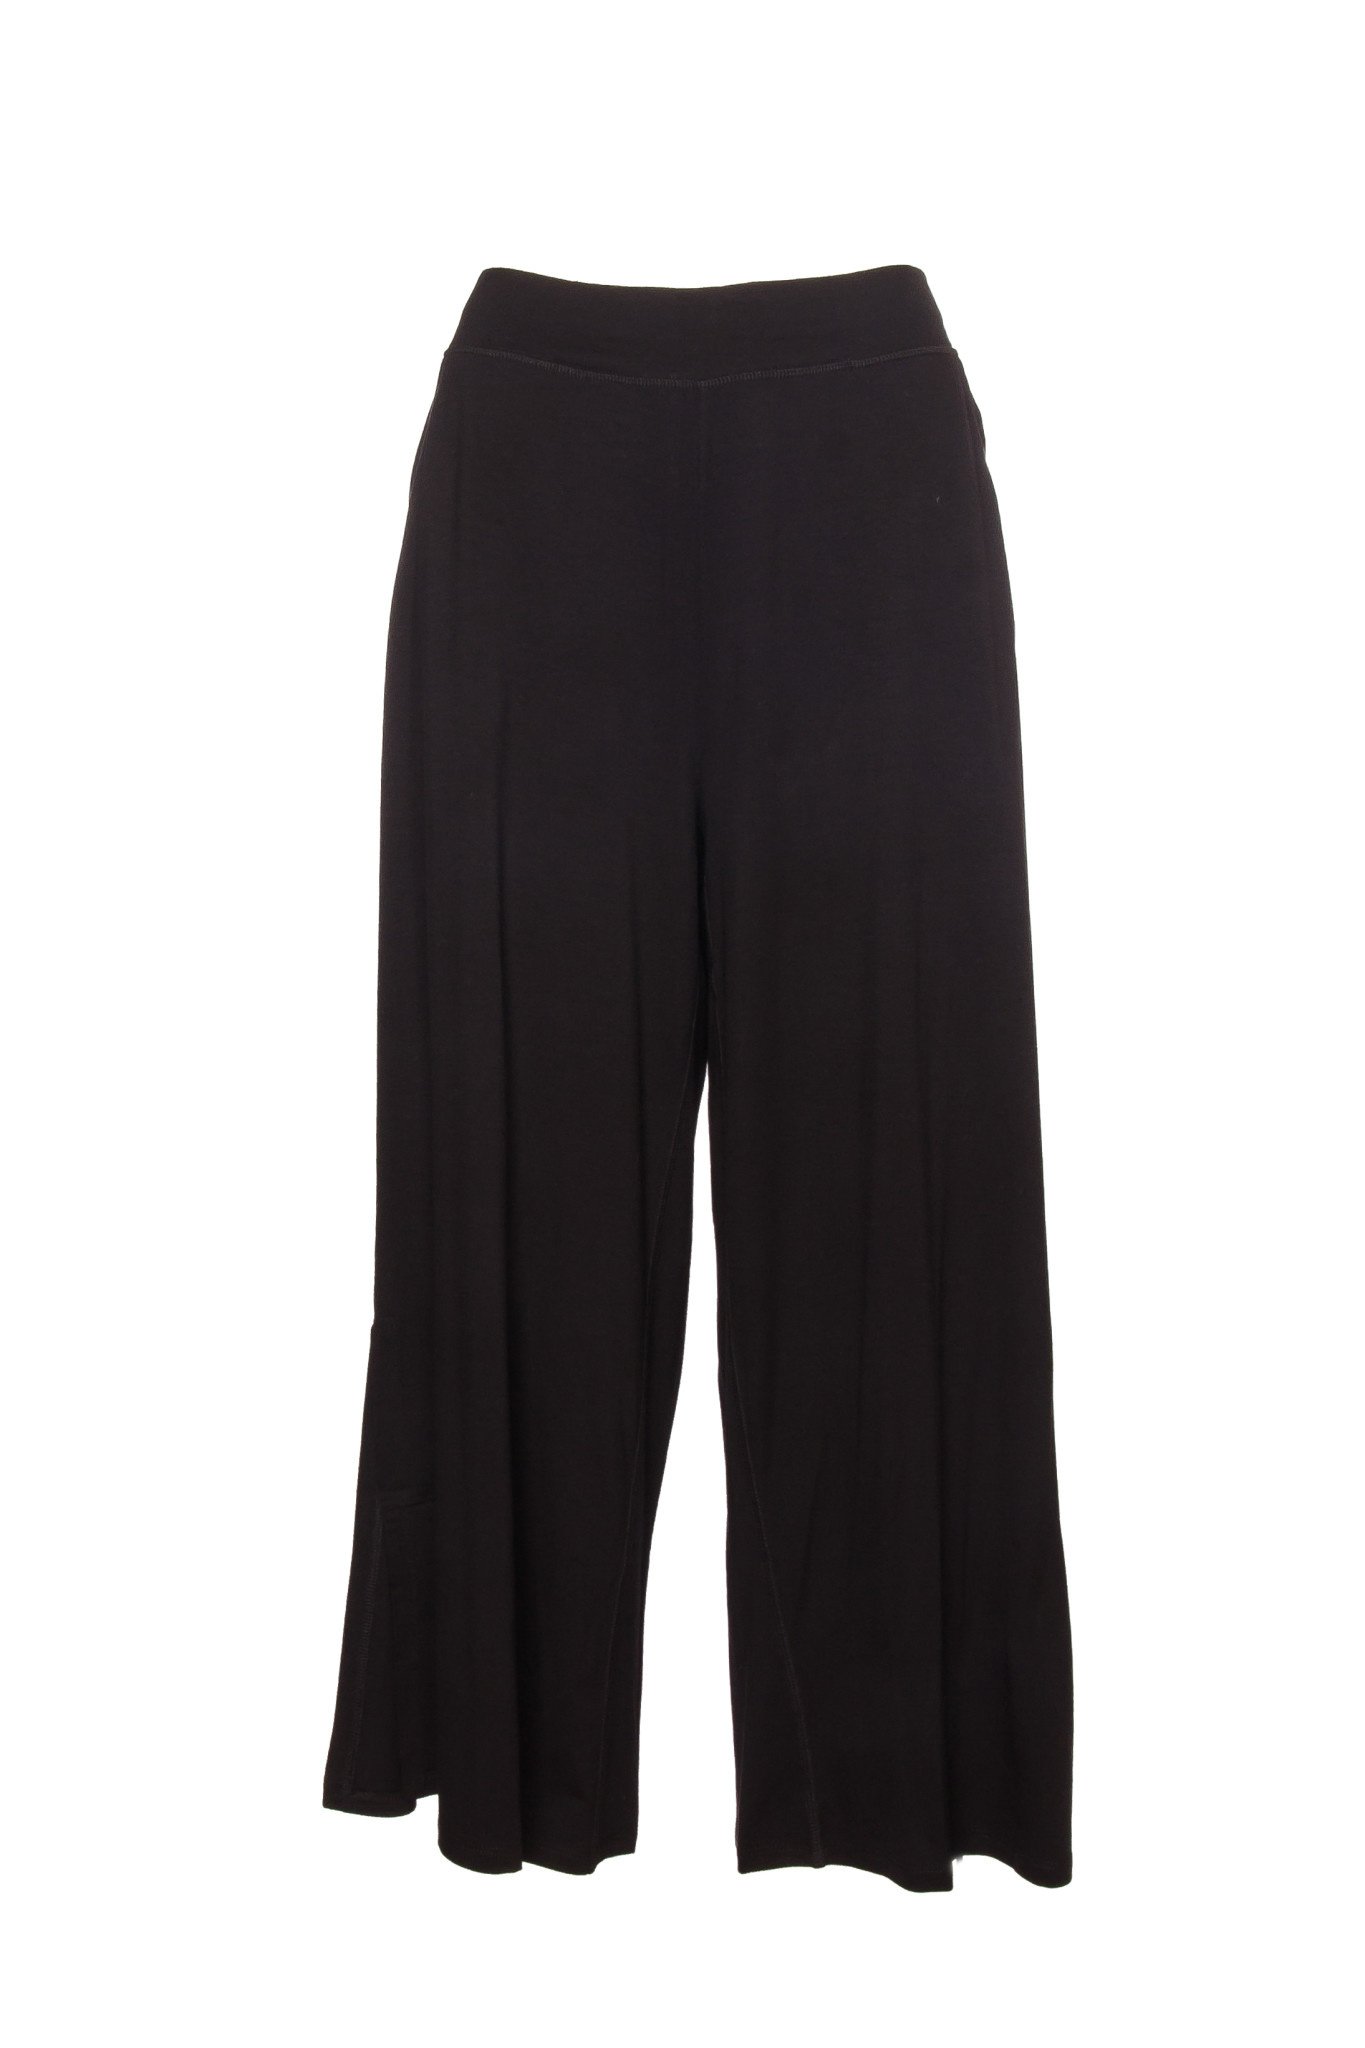 Eileen Fisher wide leg pants for all occasions